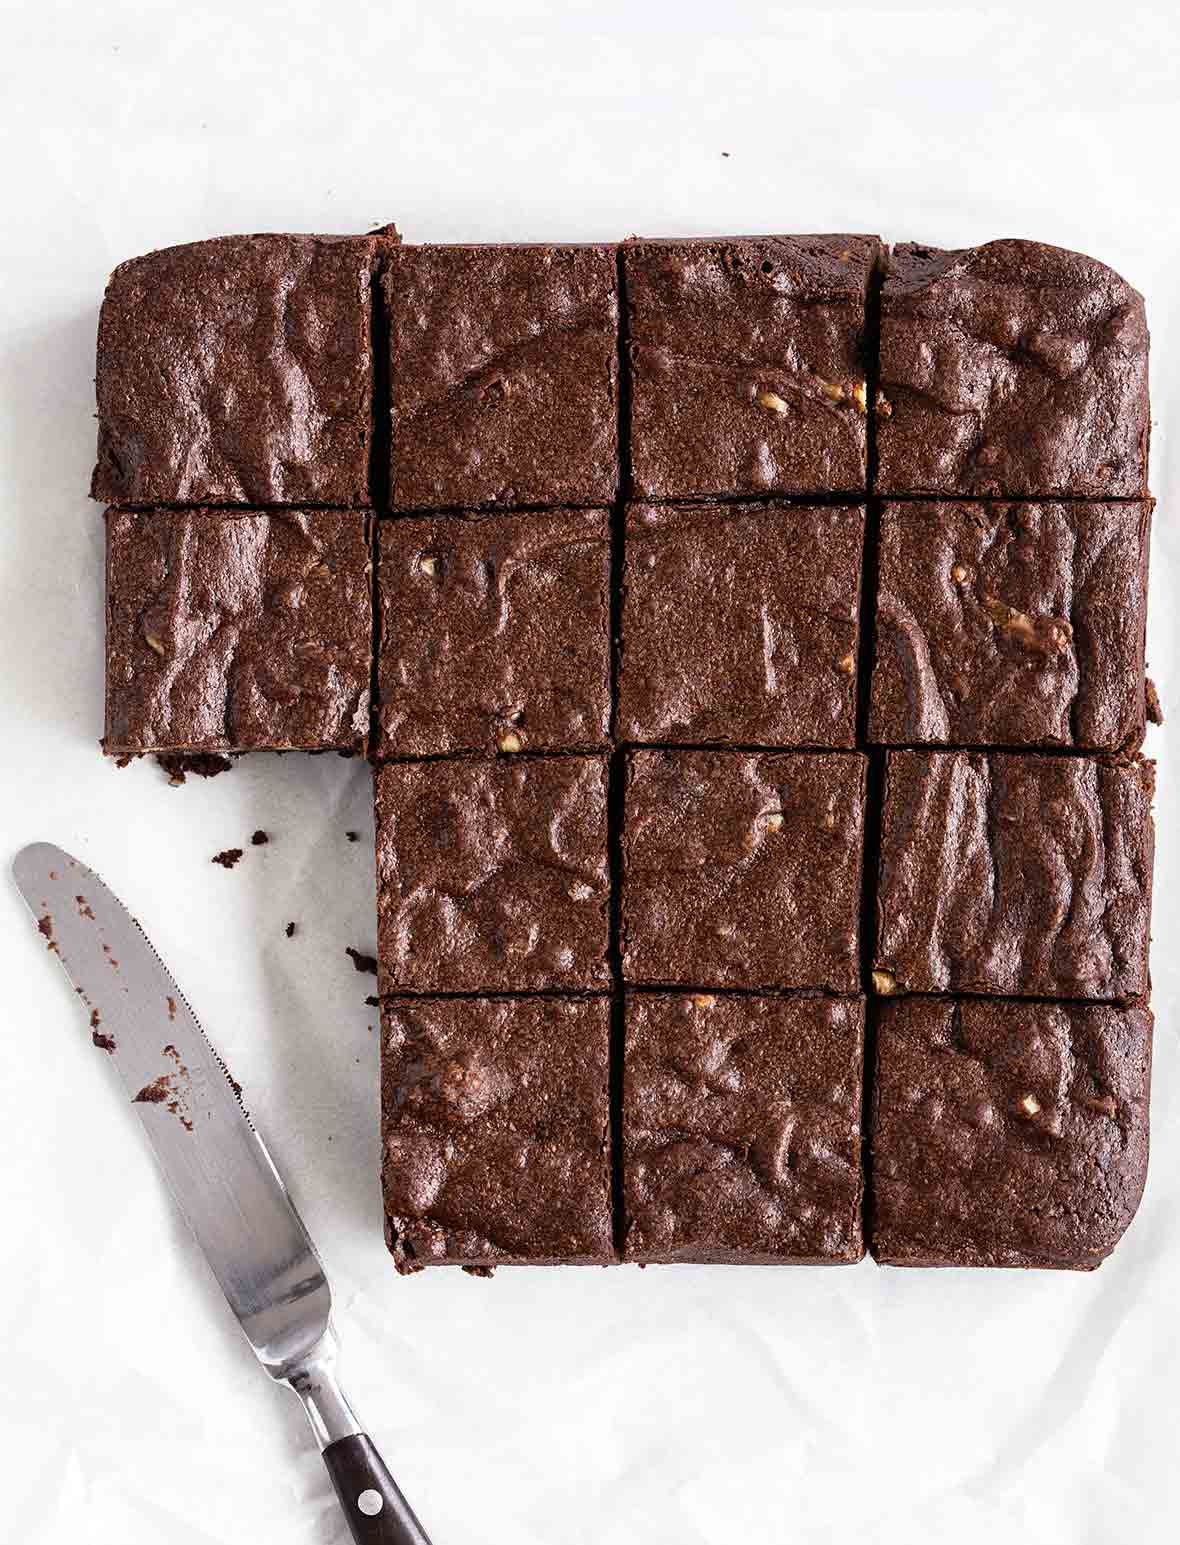 14 fat, chocolatey fudgy pudgy brownies sliced, with a table knife nearby with crumbs